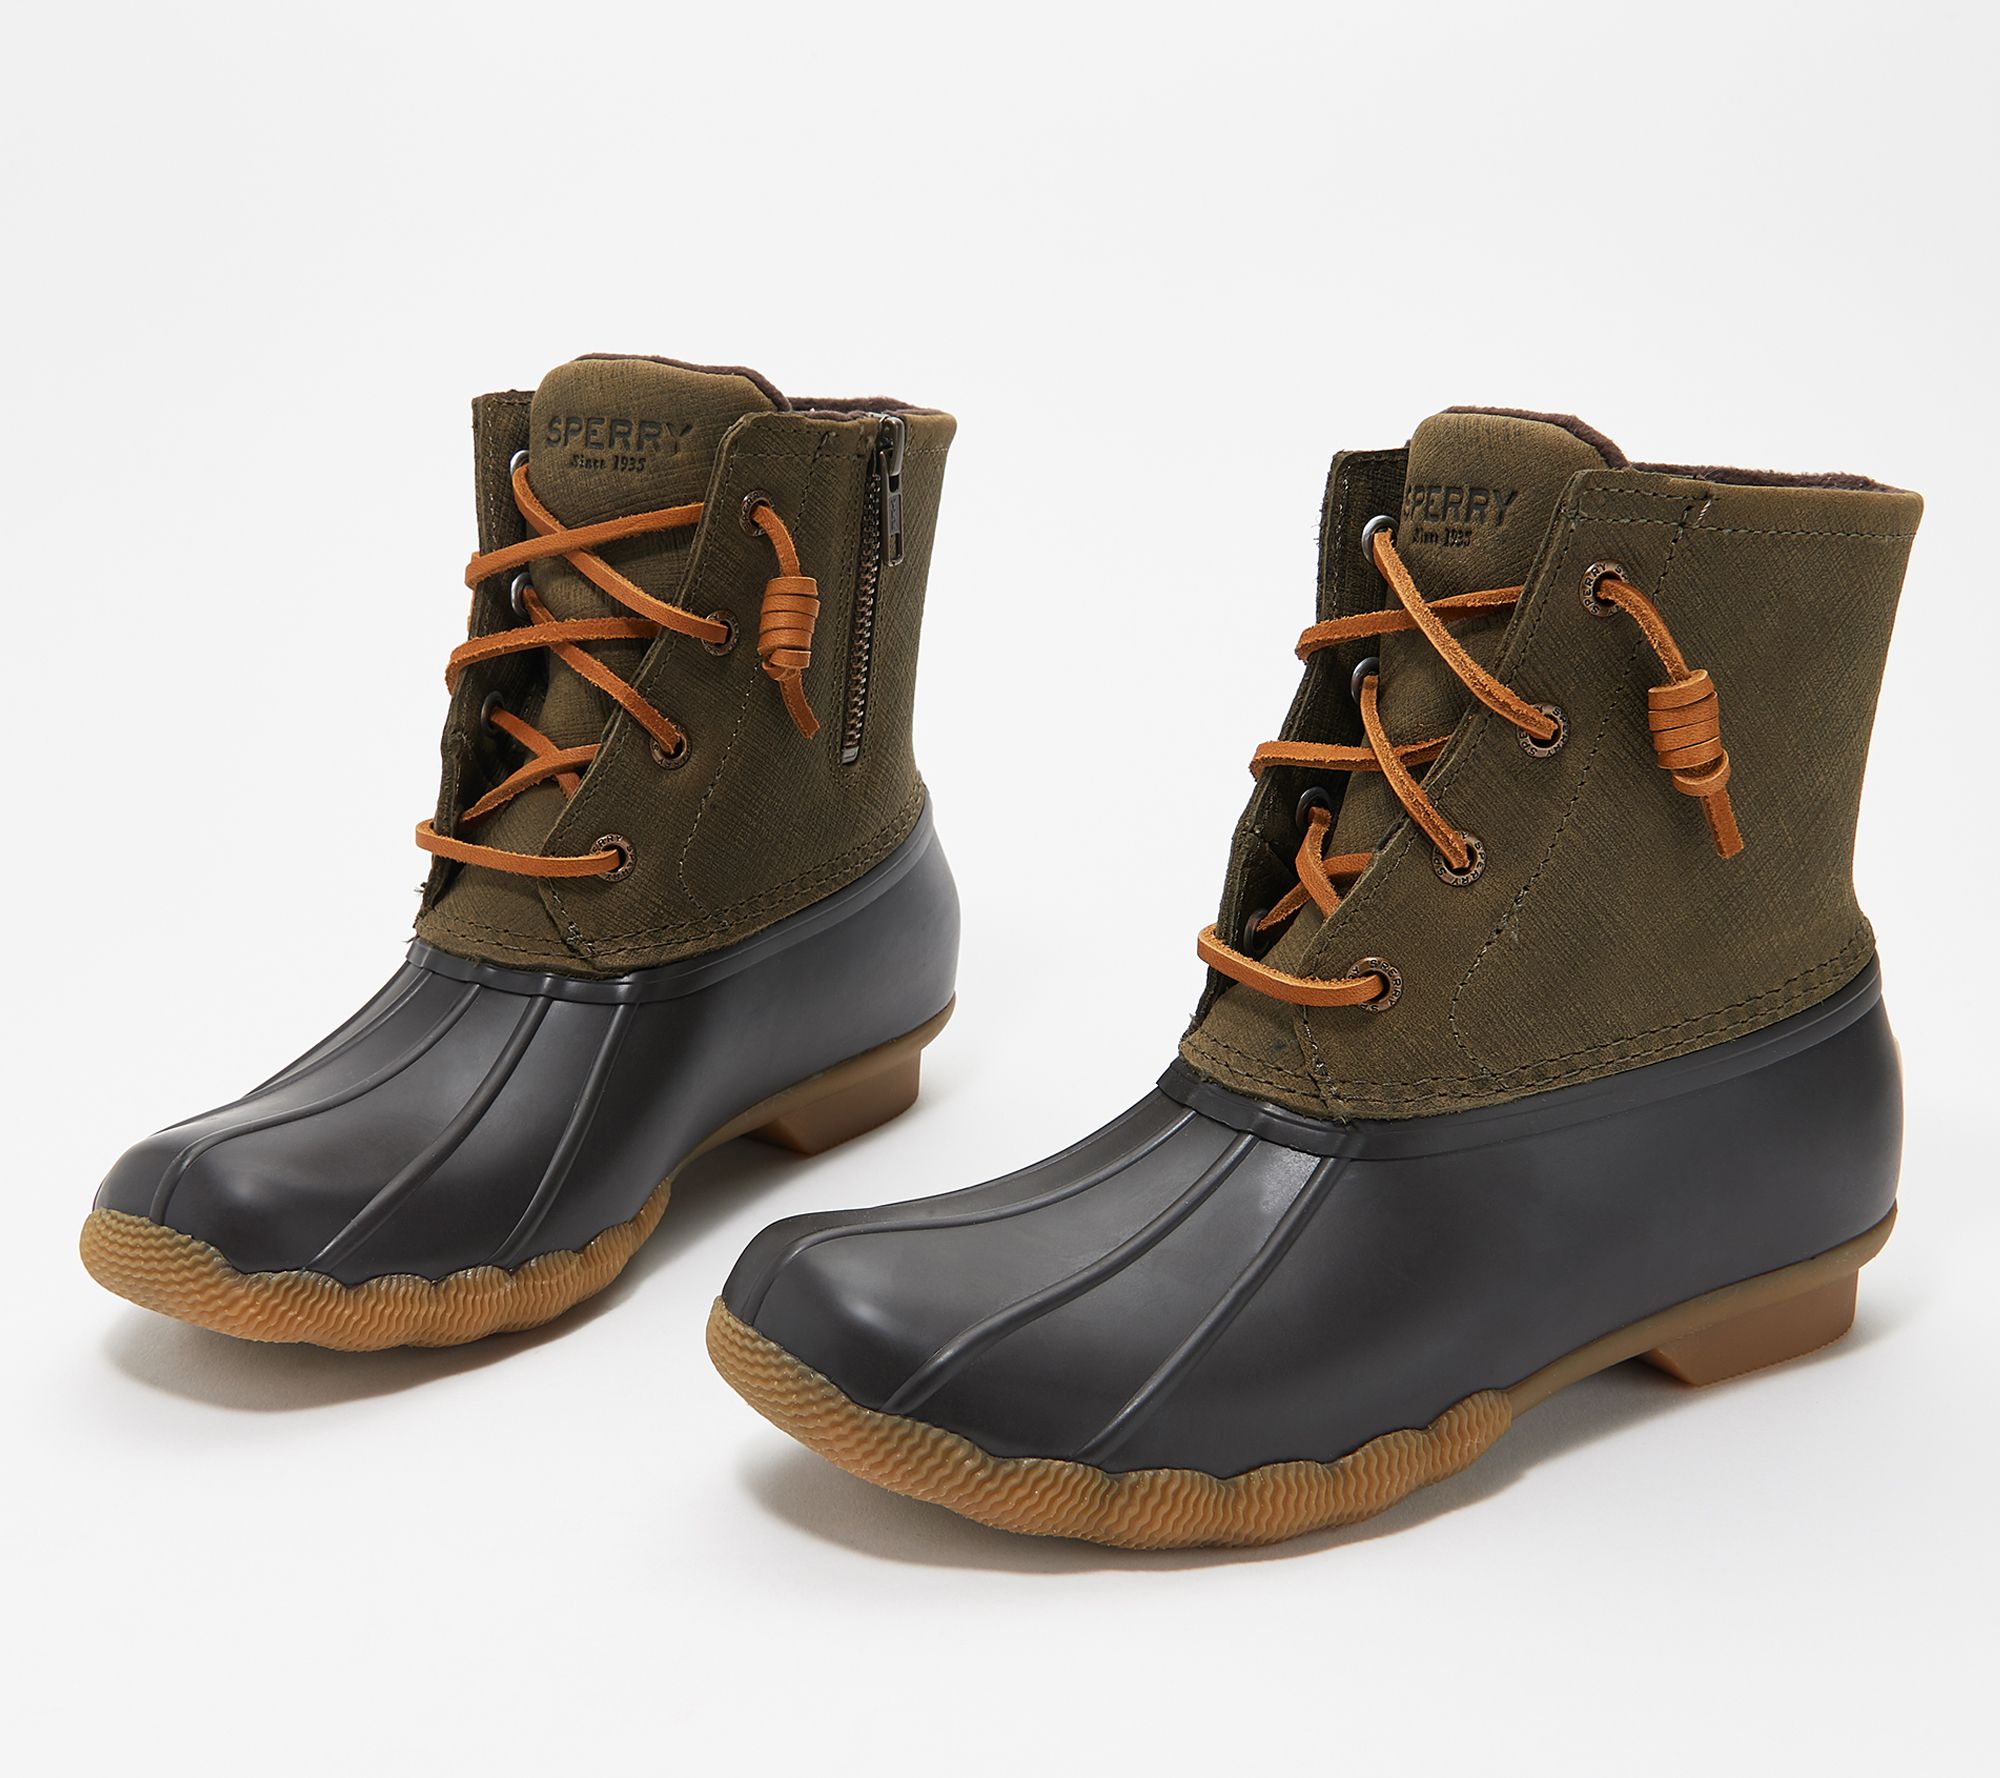 sperry duck boots insulated